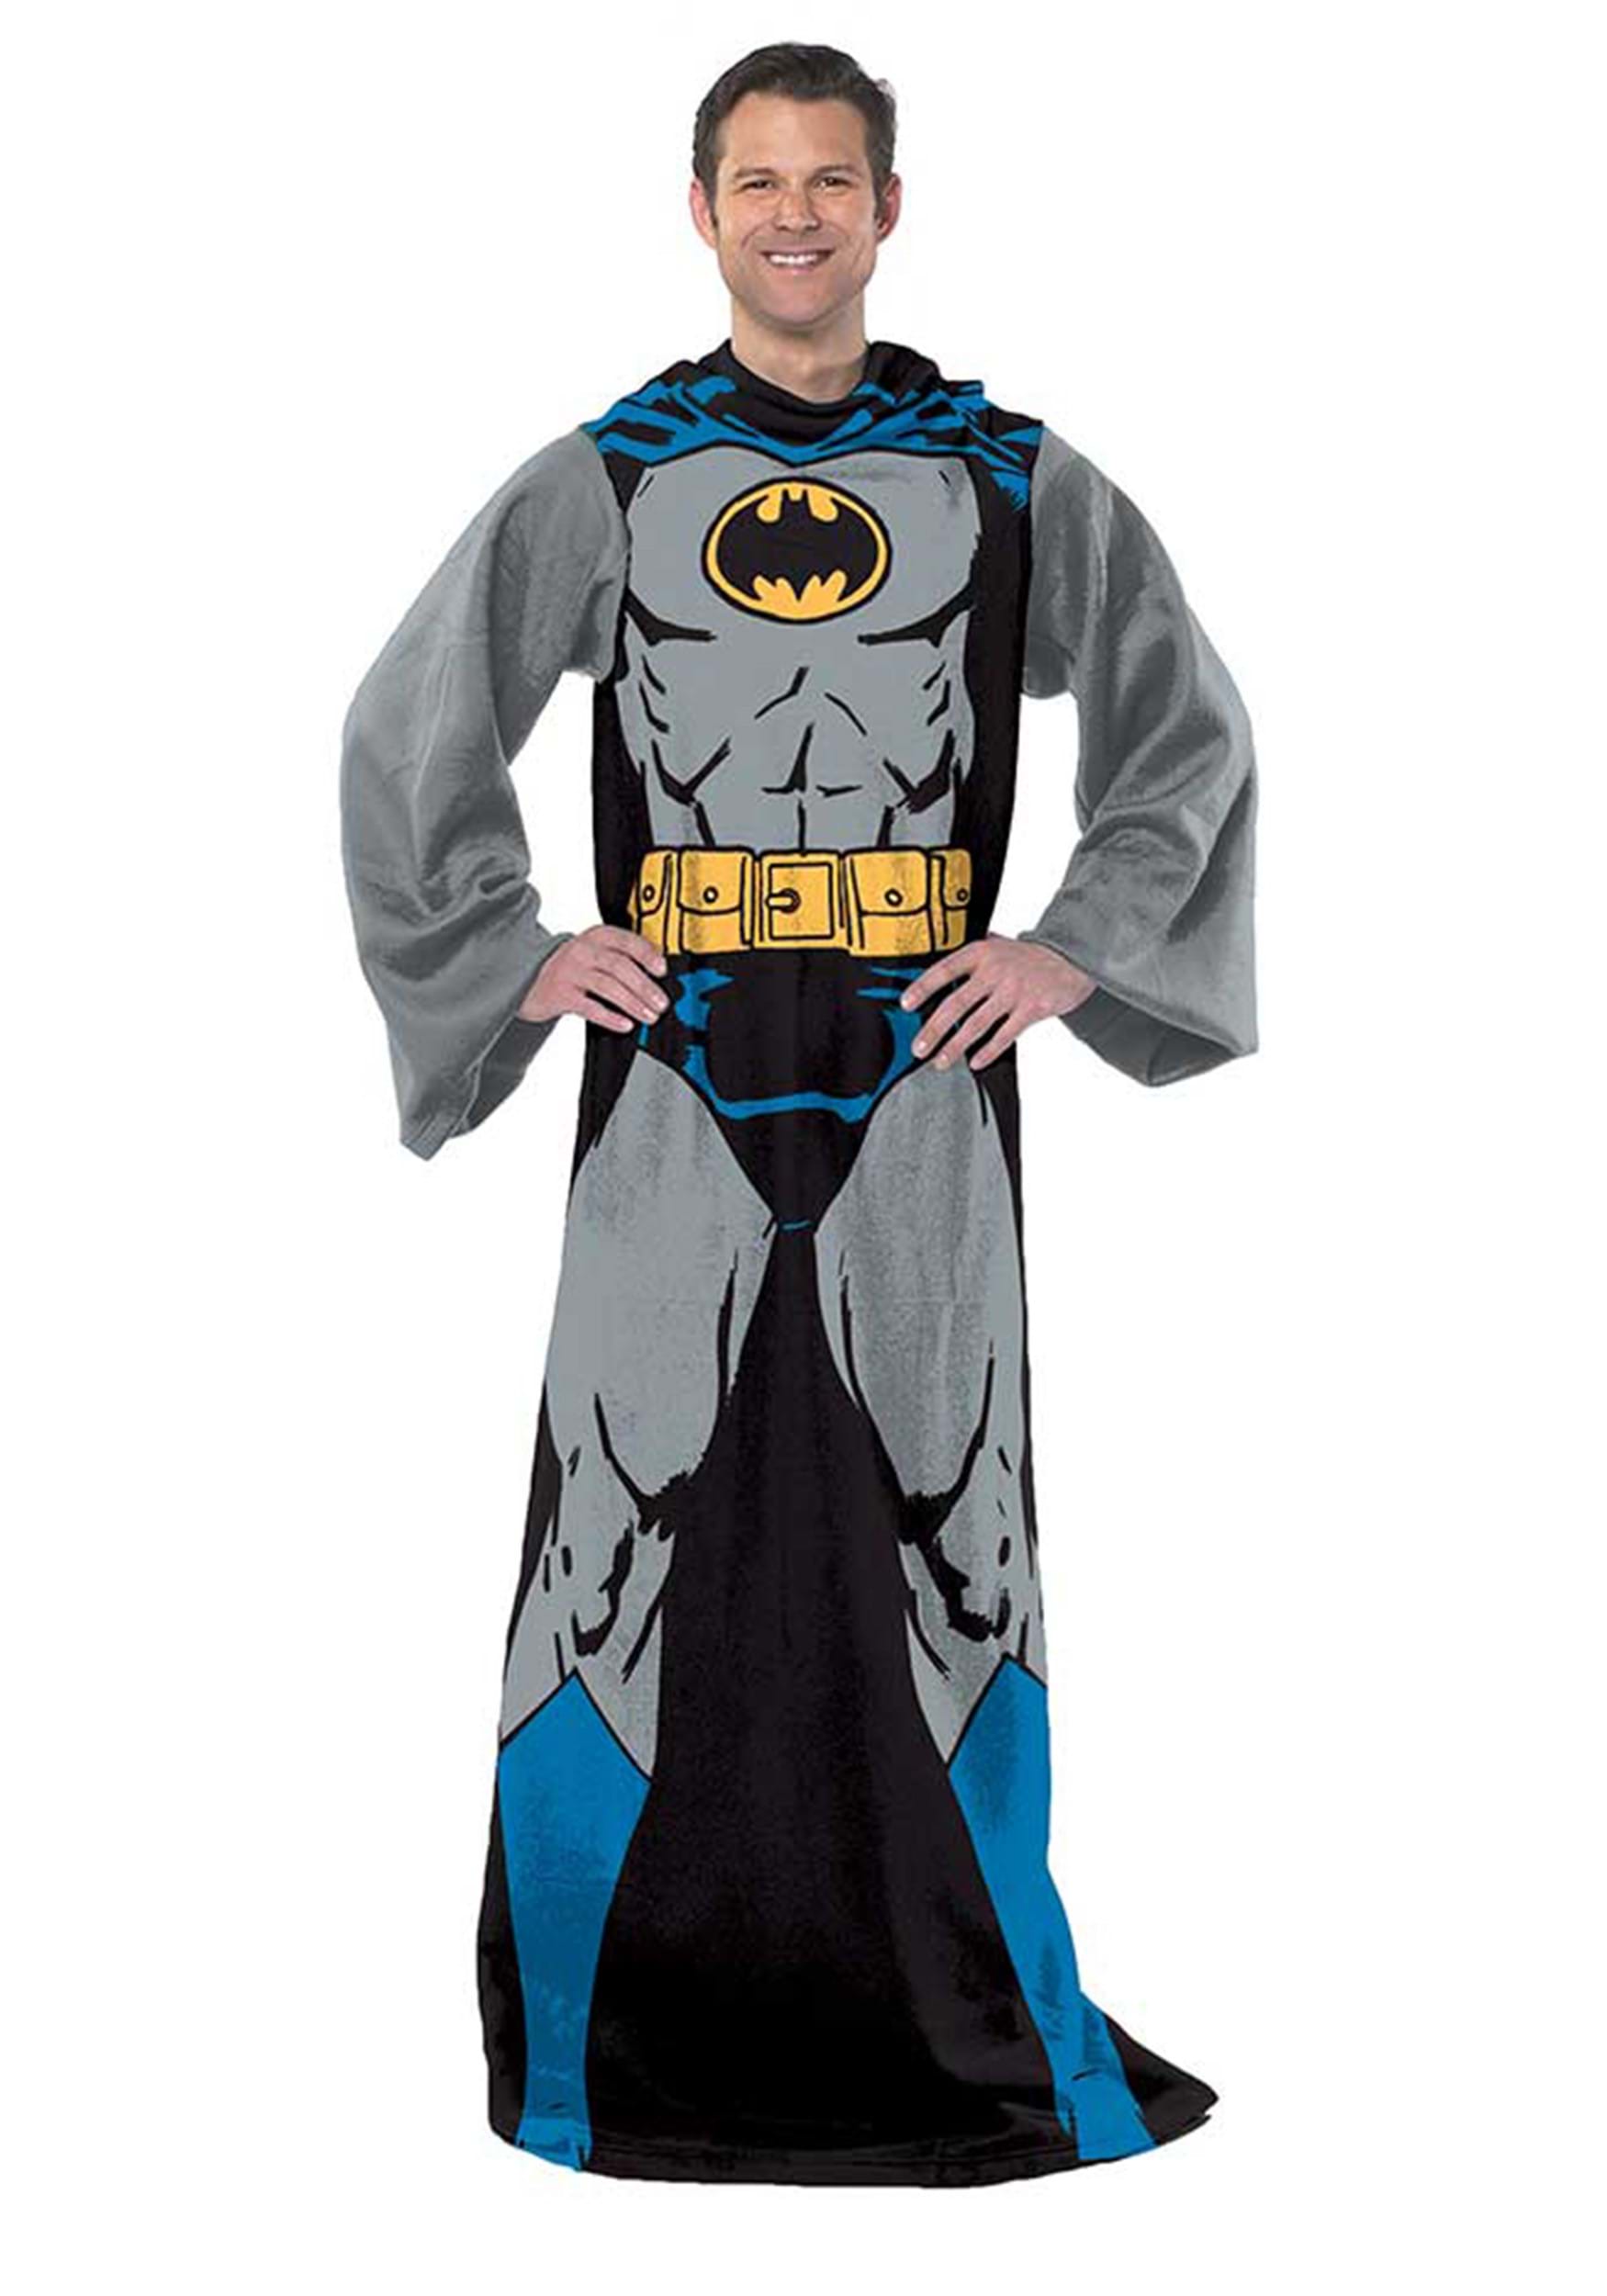 https://images.halloweencostumes.com/products/77719/1-1/batman-adult-silk-touch-comfy-throw.jpg